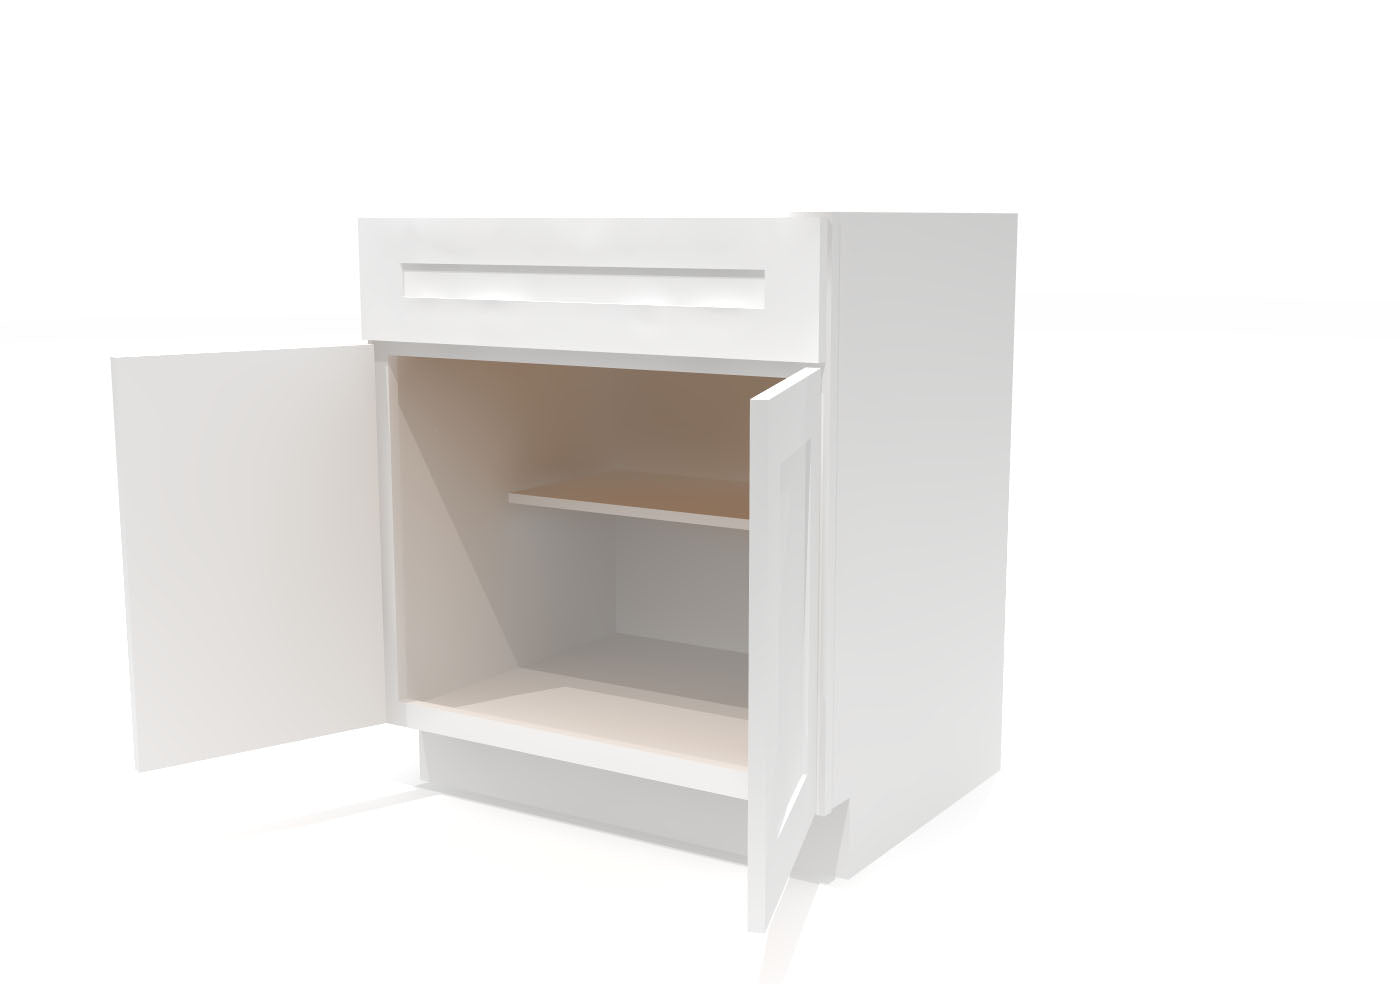 Base Double Door One Drawer 30" Wide White Shaker Cabinet